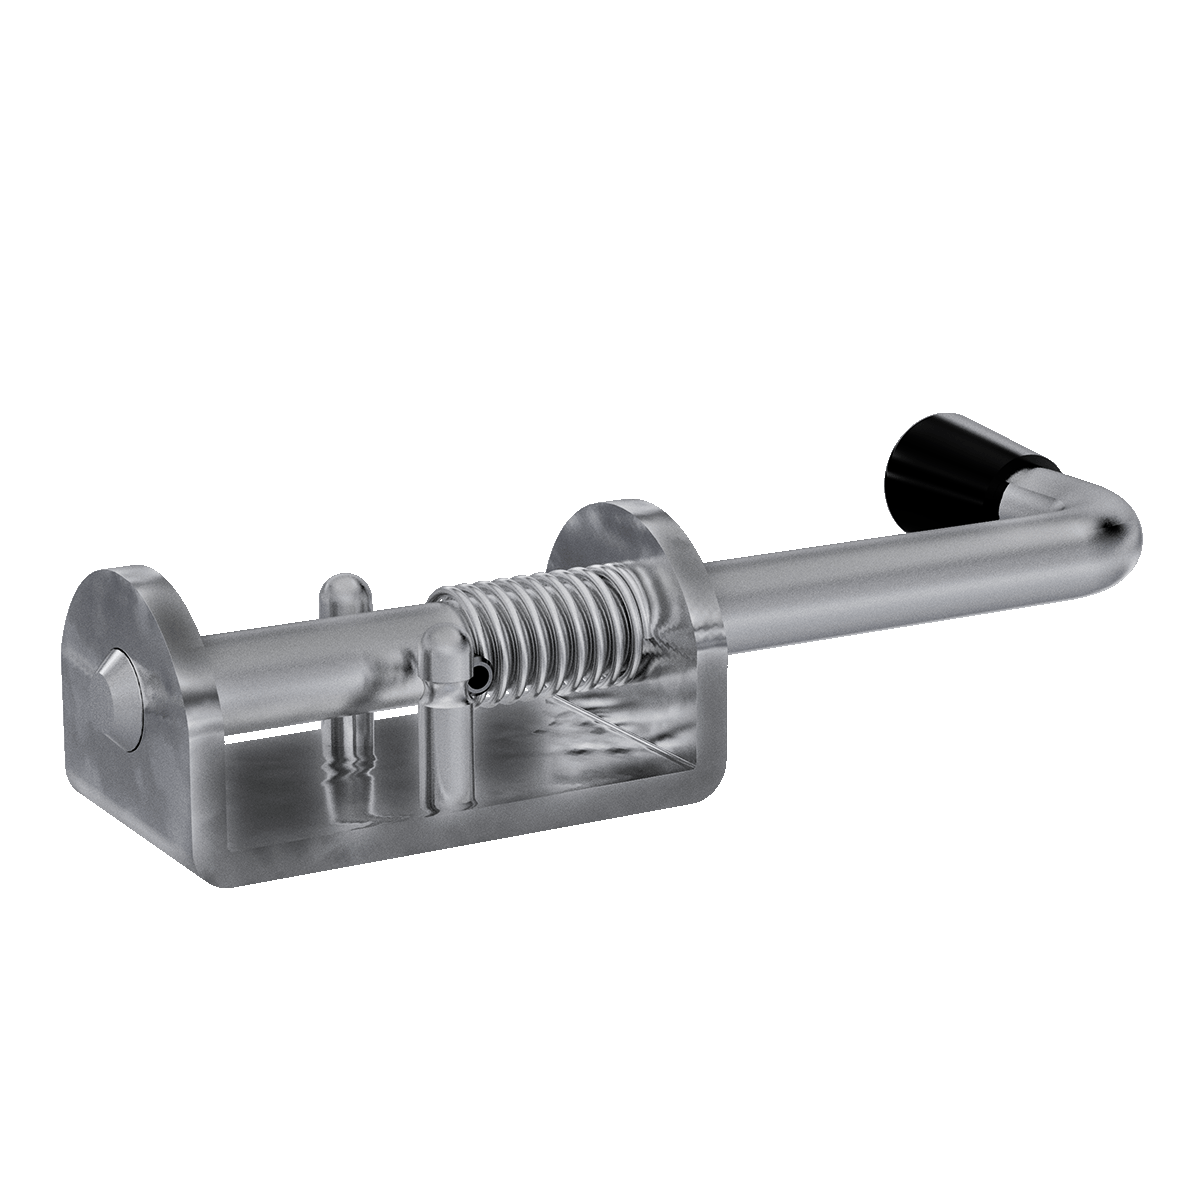 Aluminum base Spring Bolt with stainless steel rod. Shown in right perspective with rod in open position.